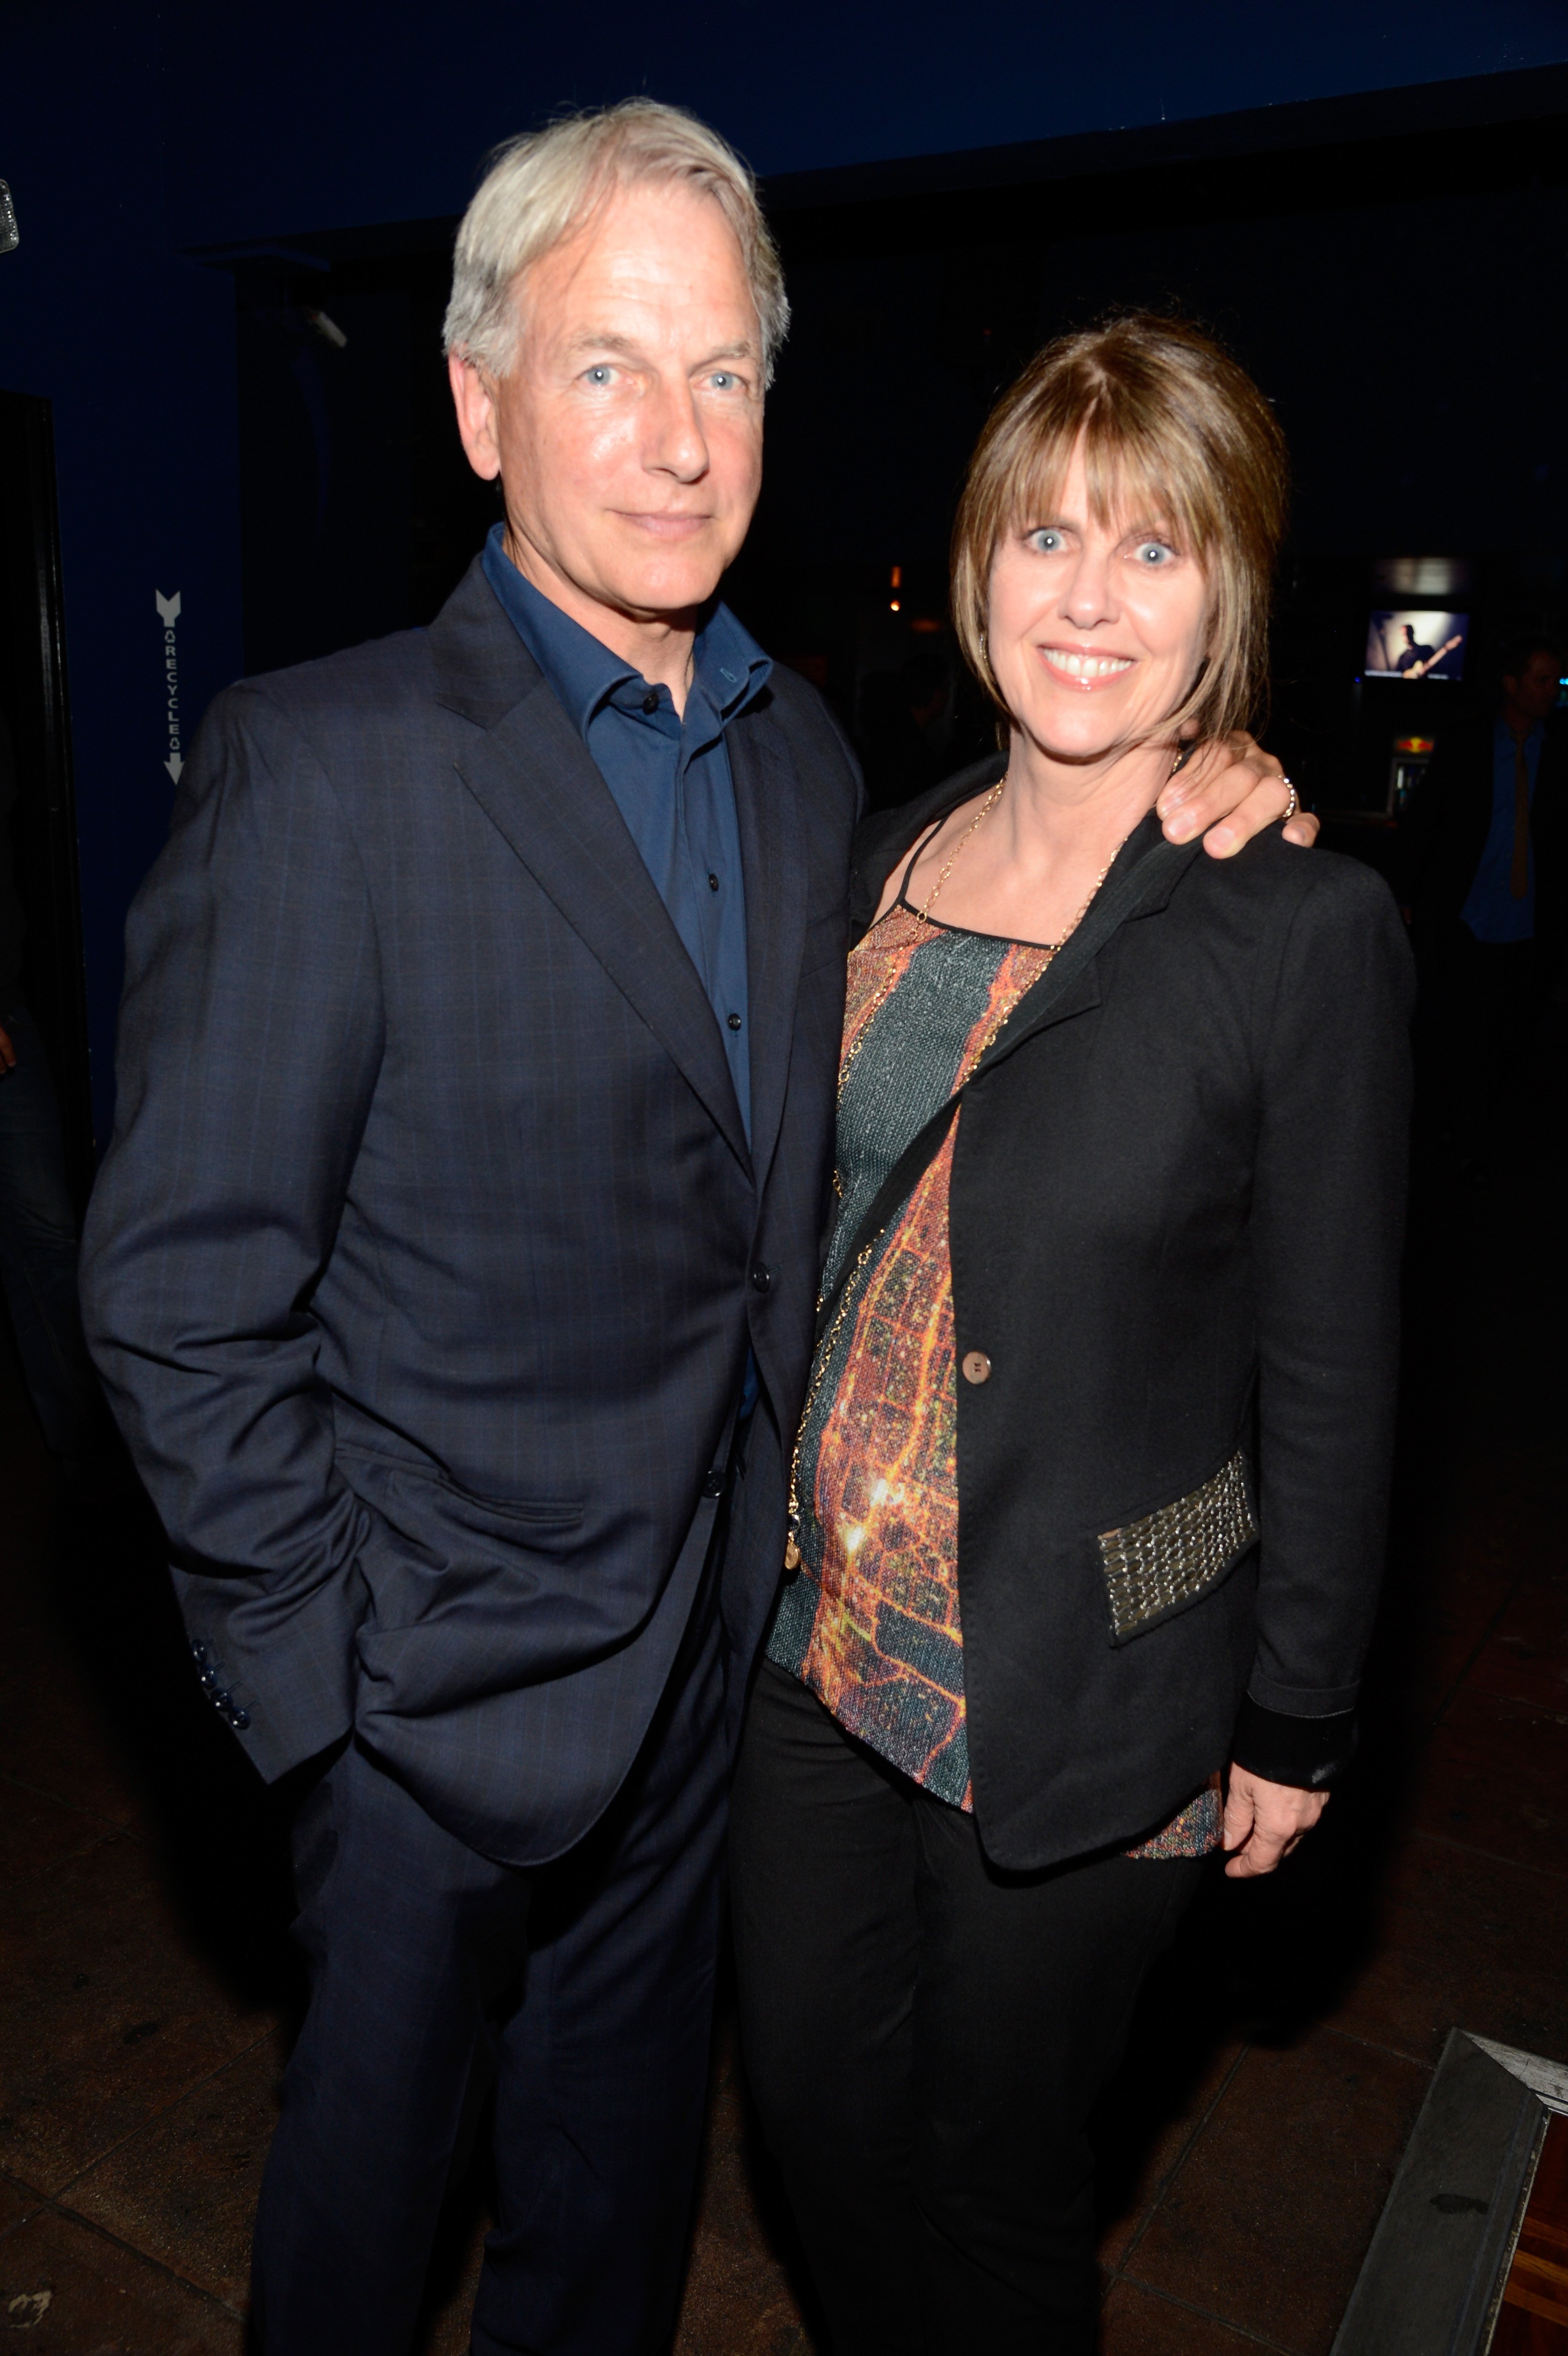 Actor Mark Harmon and wife actress Pam Dawber during the Rolling Stones performance at Echoplex on April 27, 2013 in Los Angeles, California. | Source: Getty Images